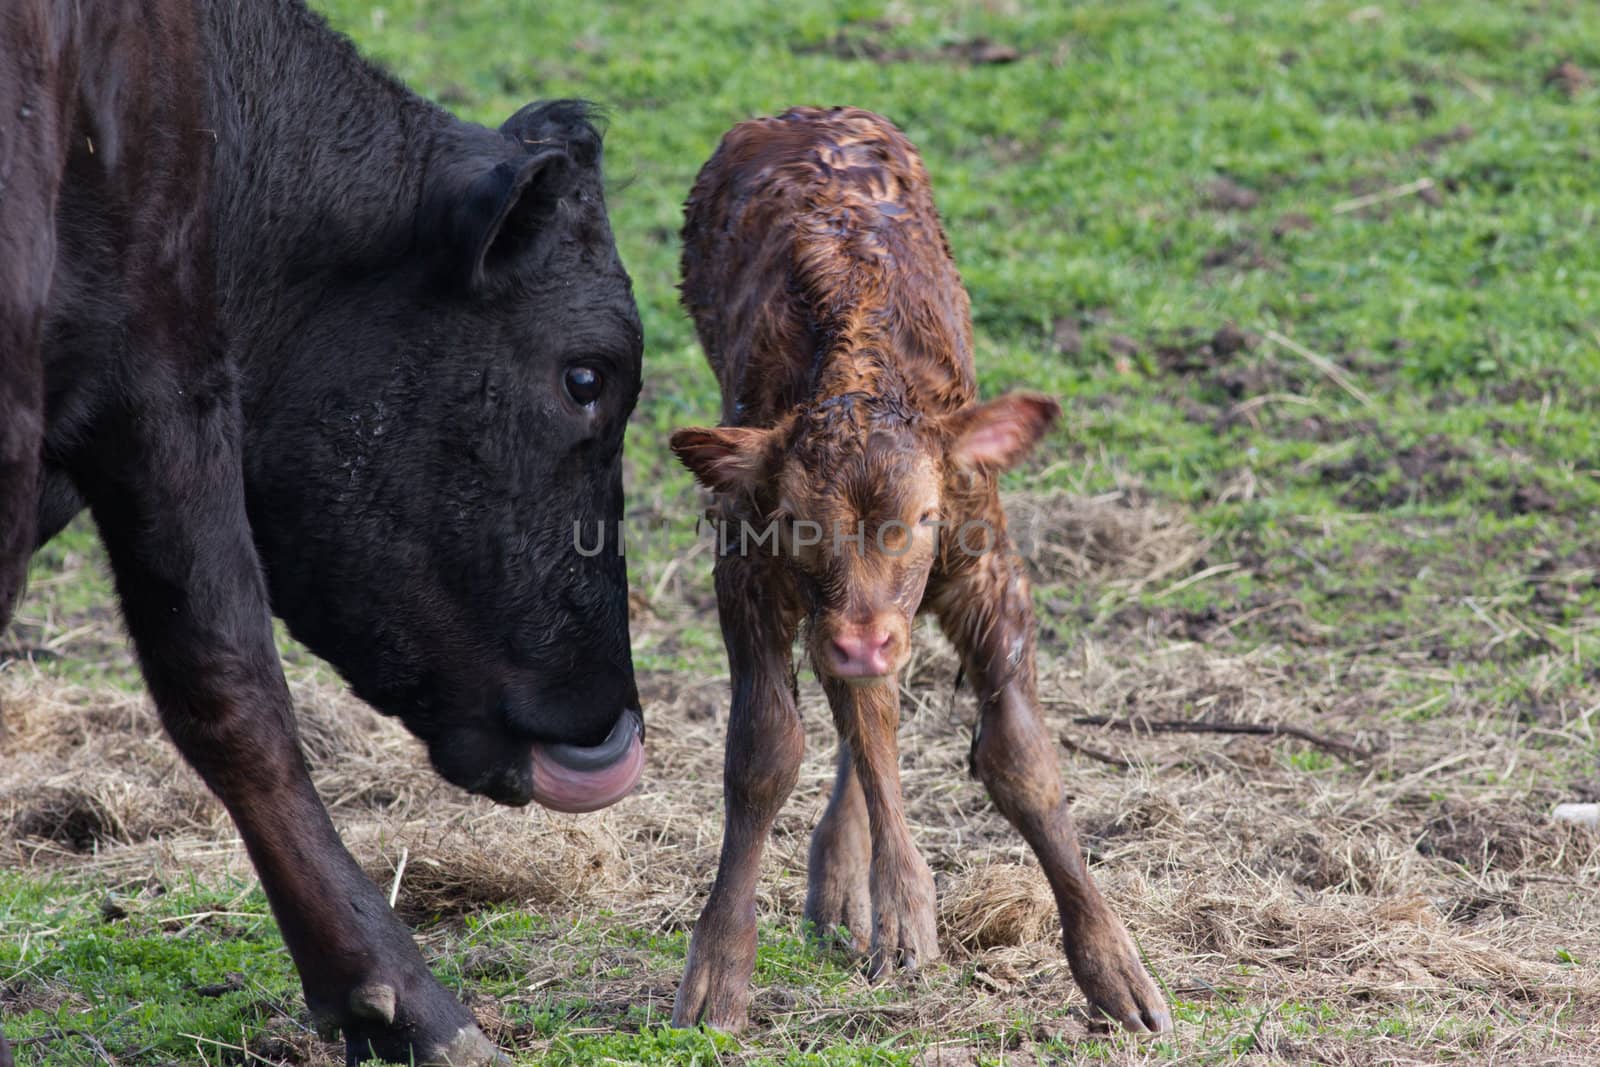 A new born calf taking its first steps